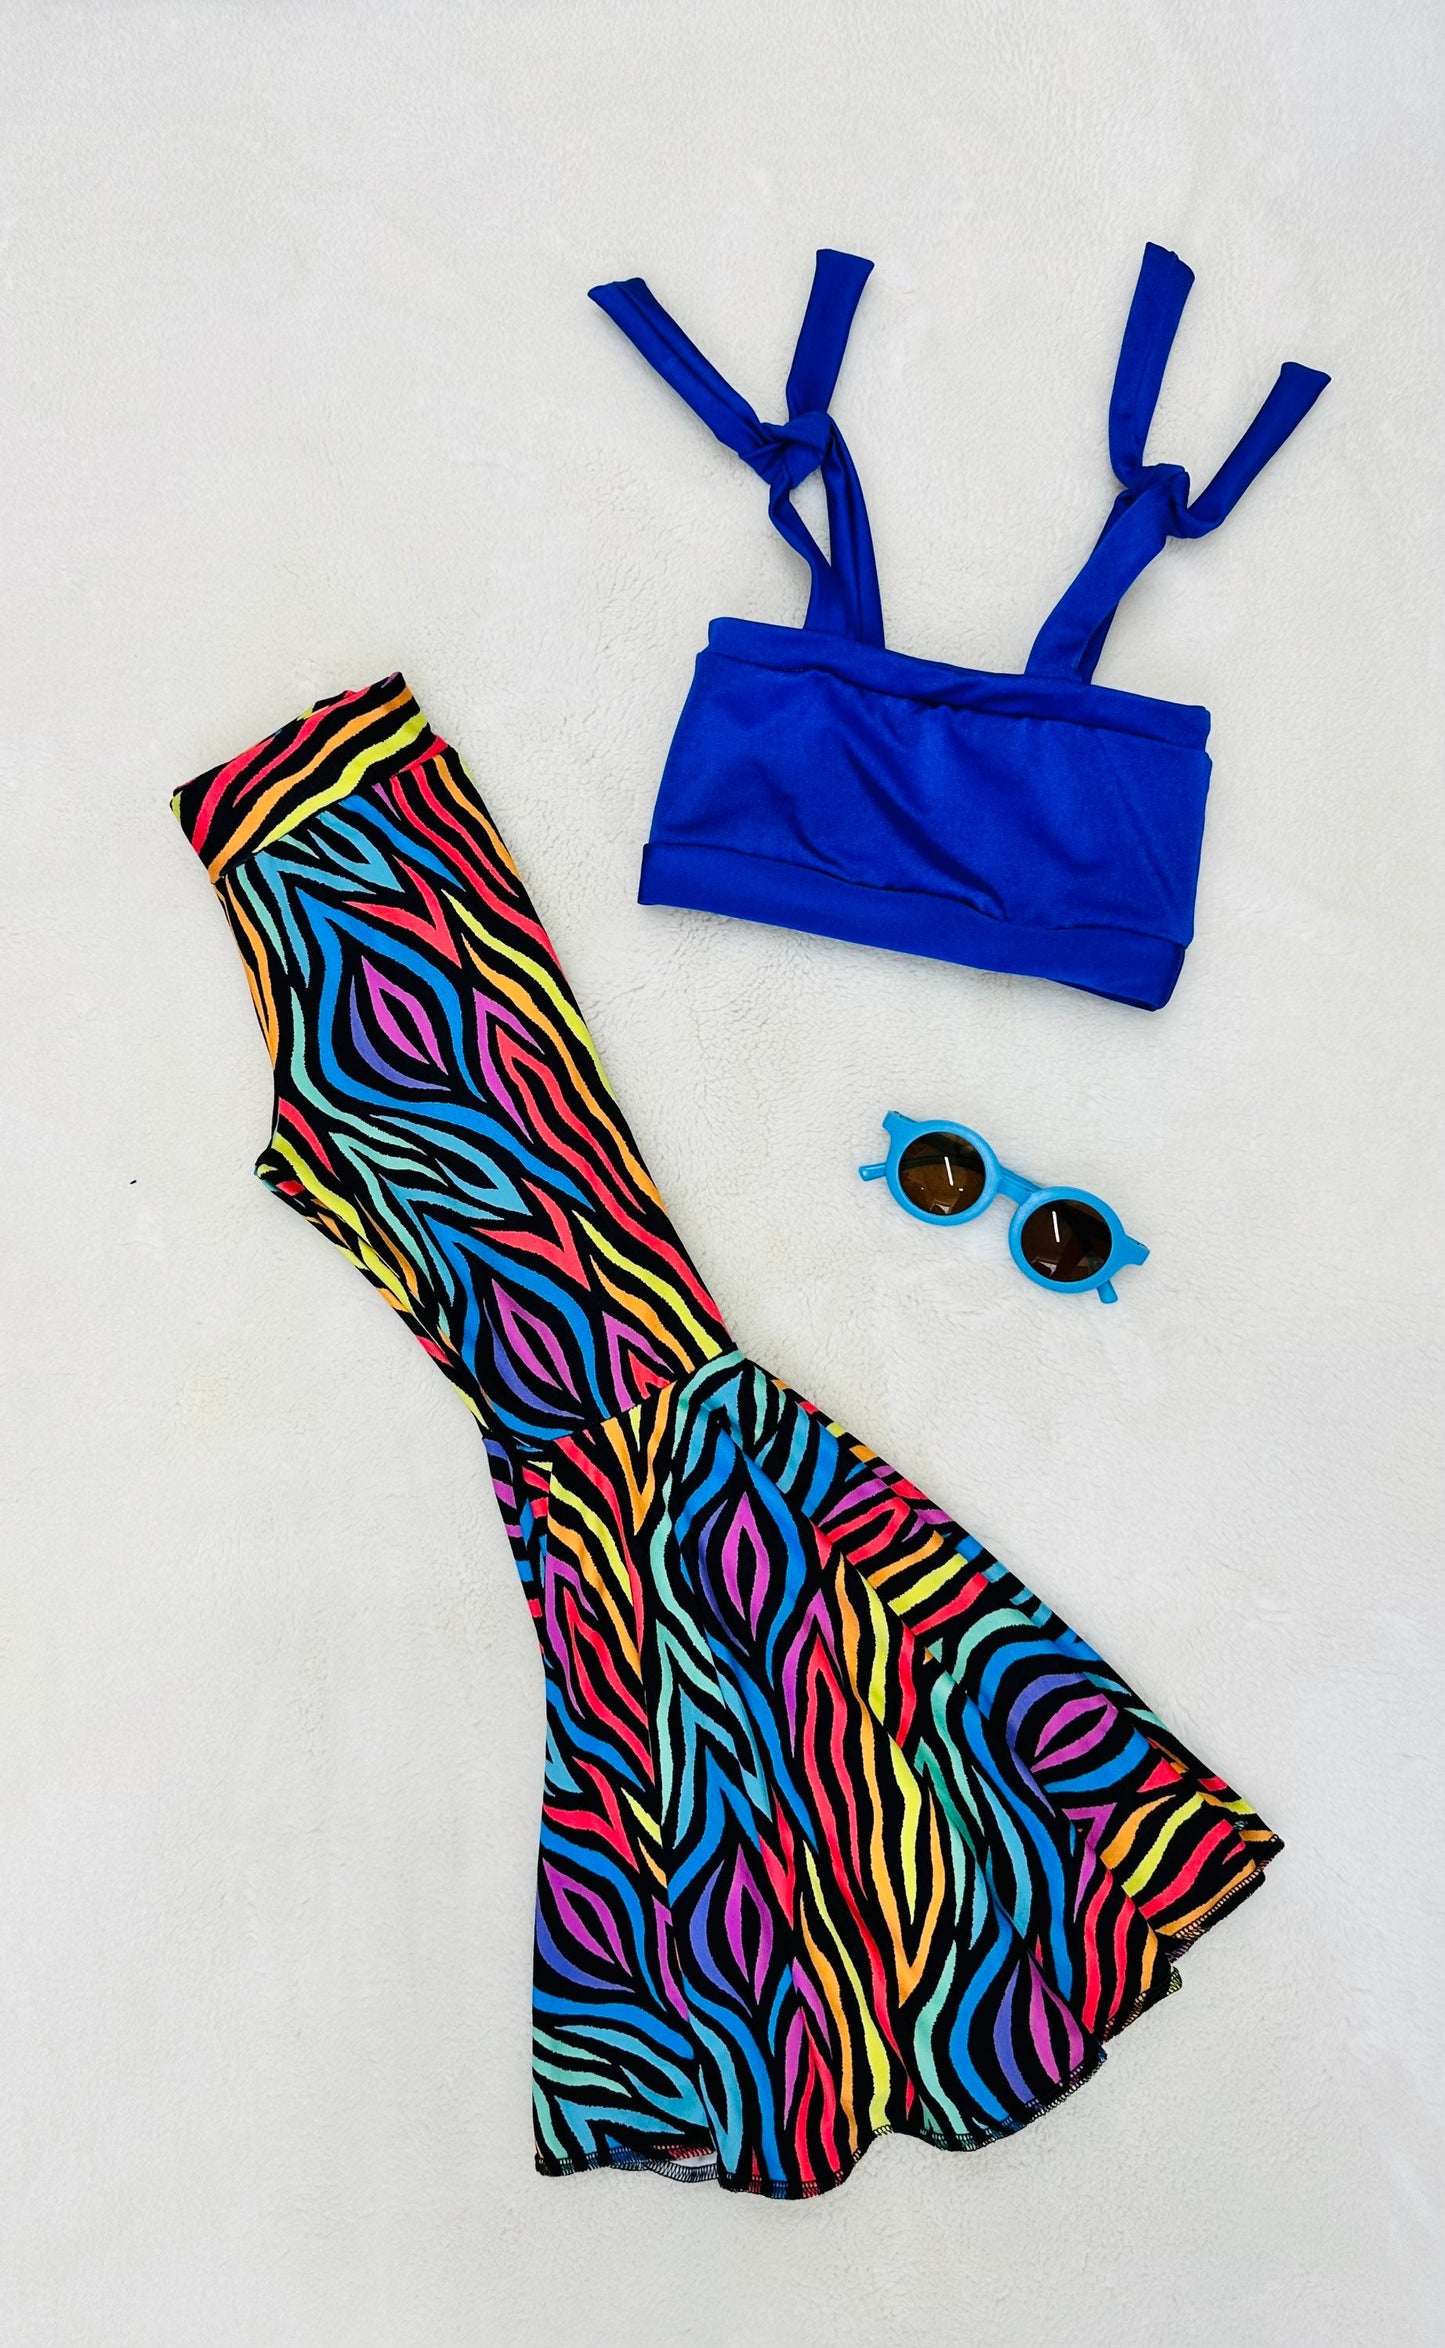 It’s a Vibe Exaggerated Bell Bottoms| Electric Blue Cropped Top With Shoulder Ties|Trendy Sunglasses| Wholesome Goods Co